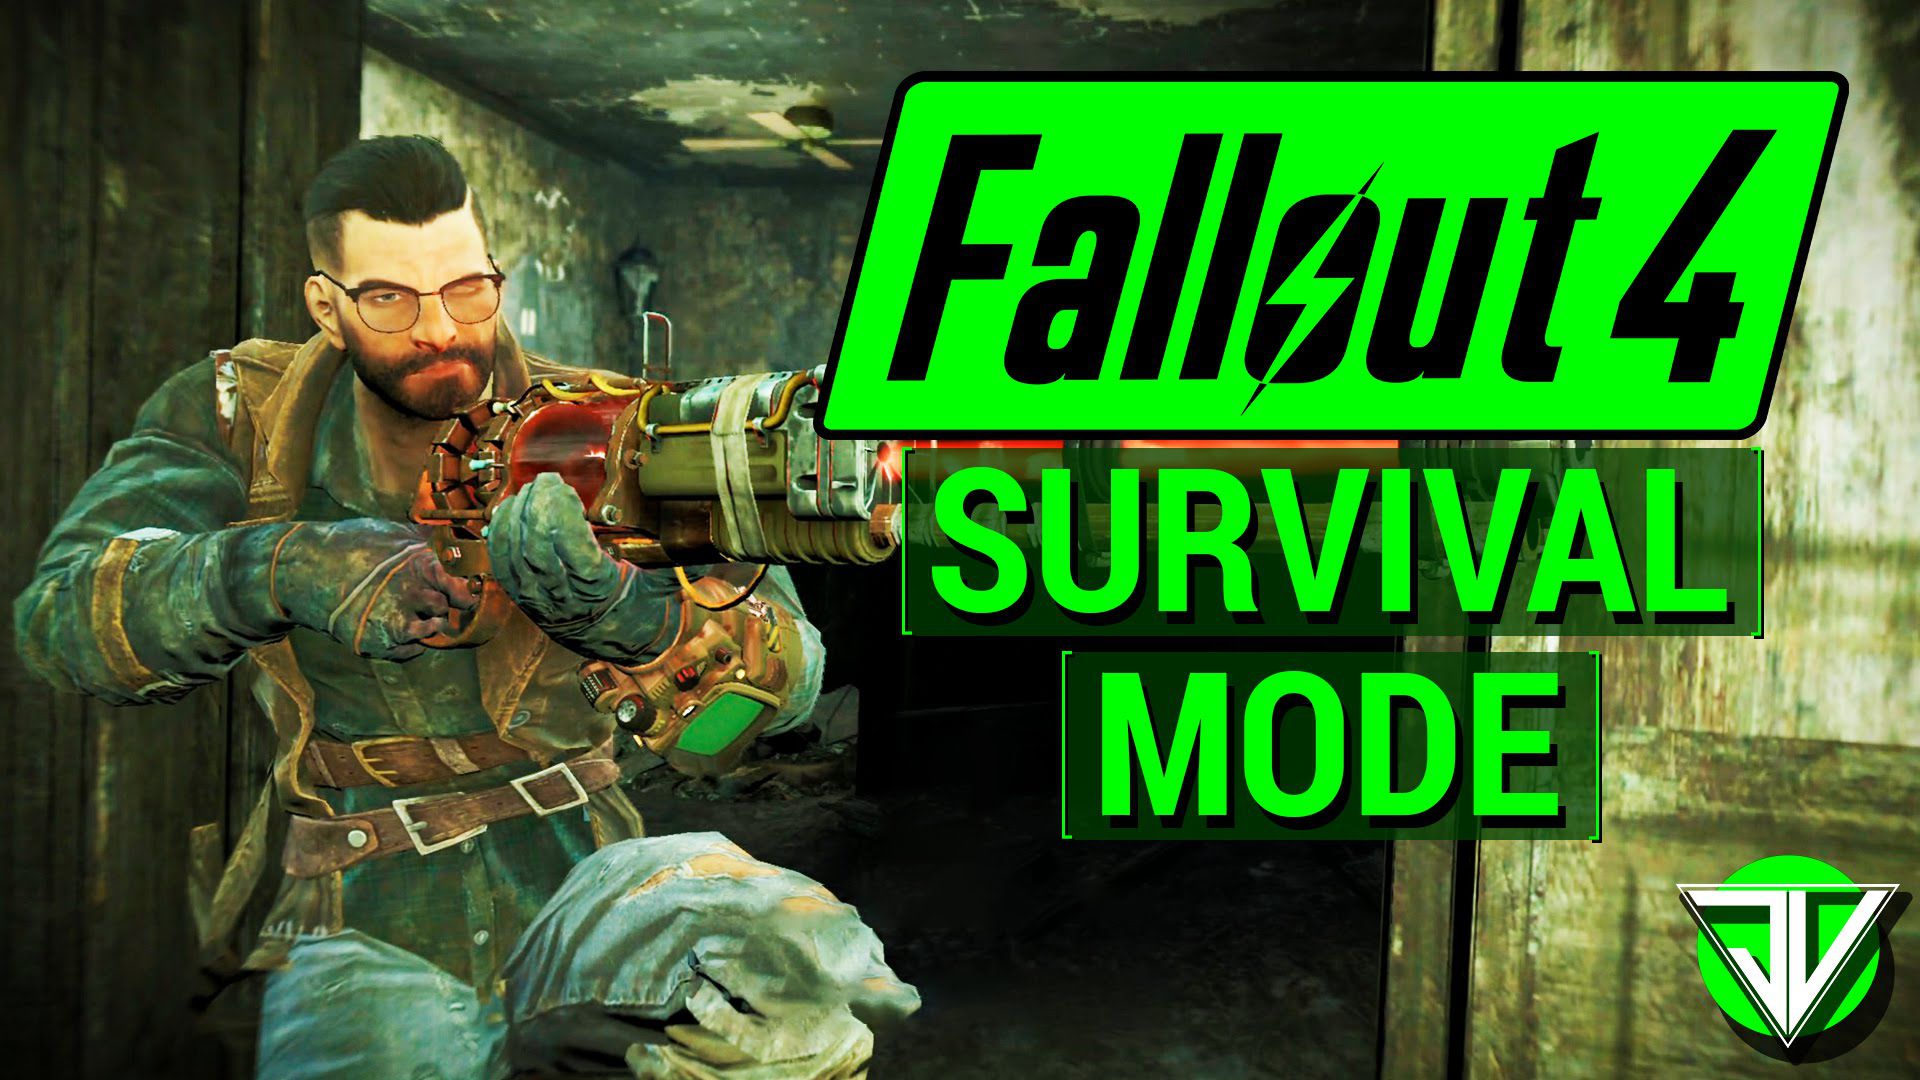 Fallout 4 survival save game фото 7